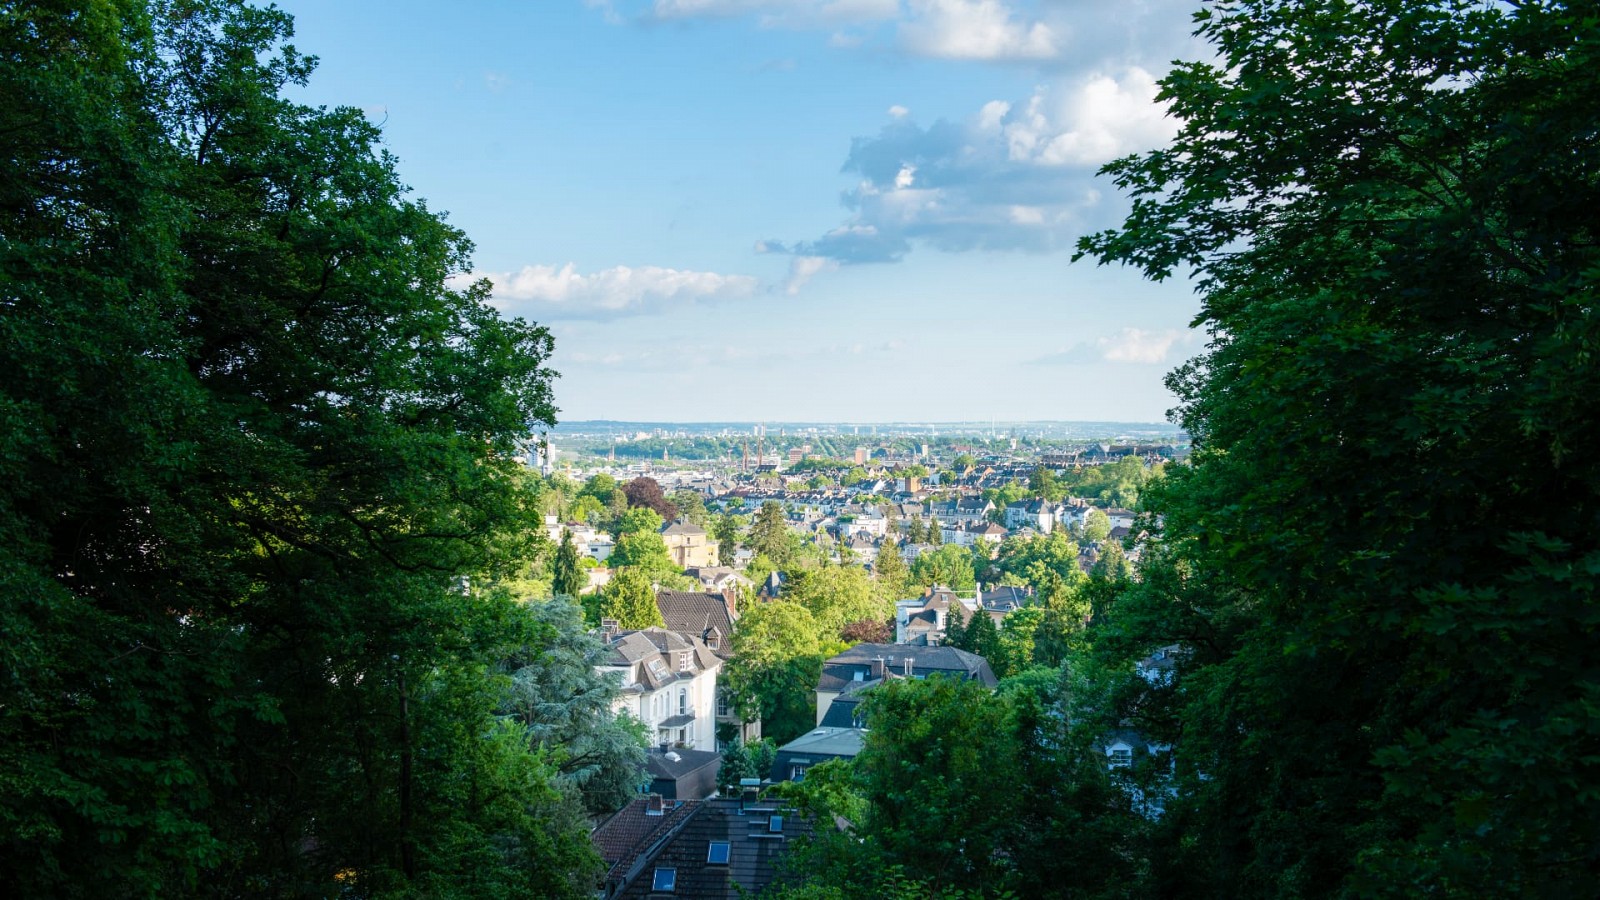 View from the Neroberg over Wiesbaden